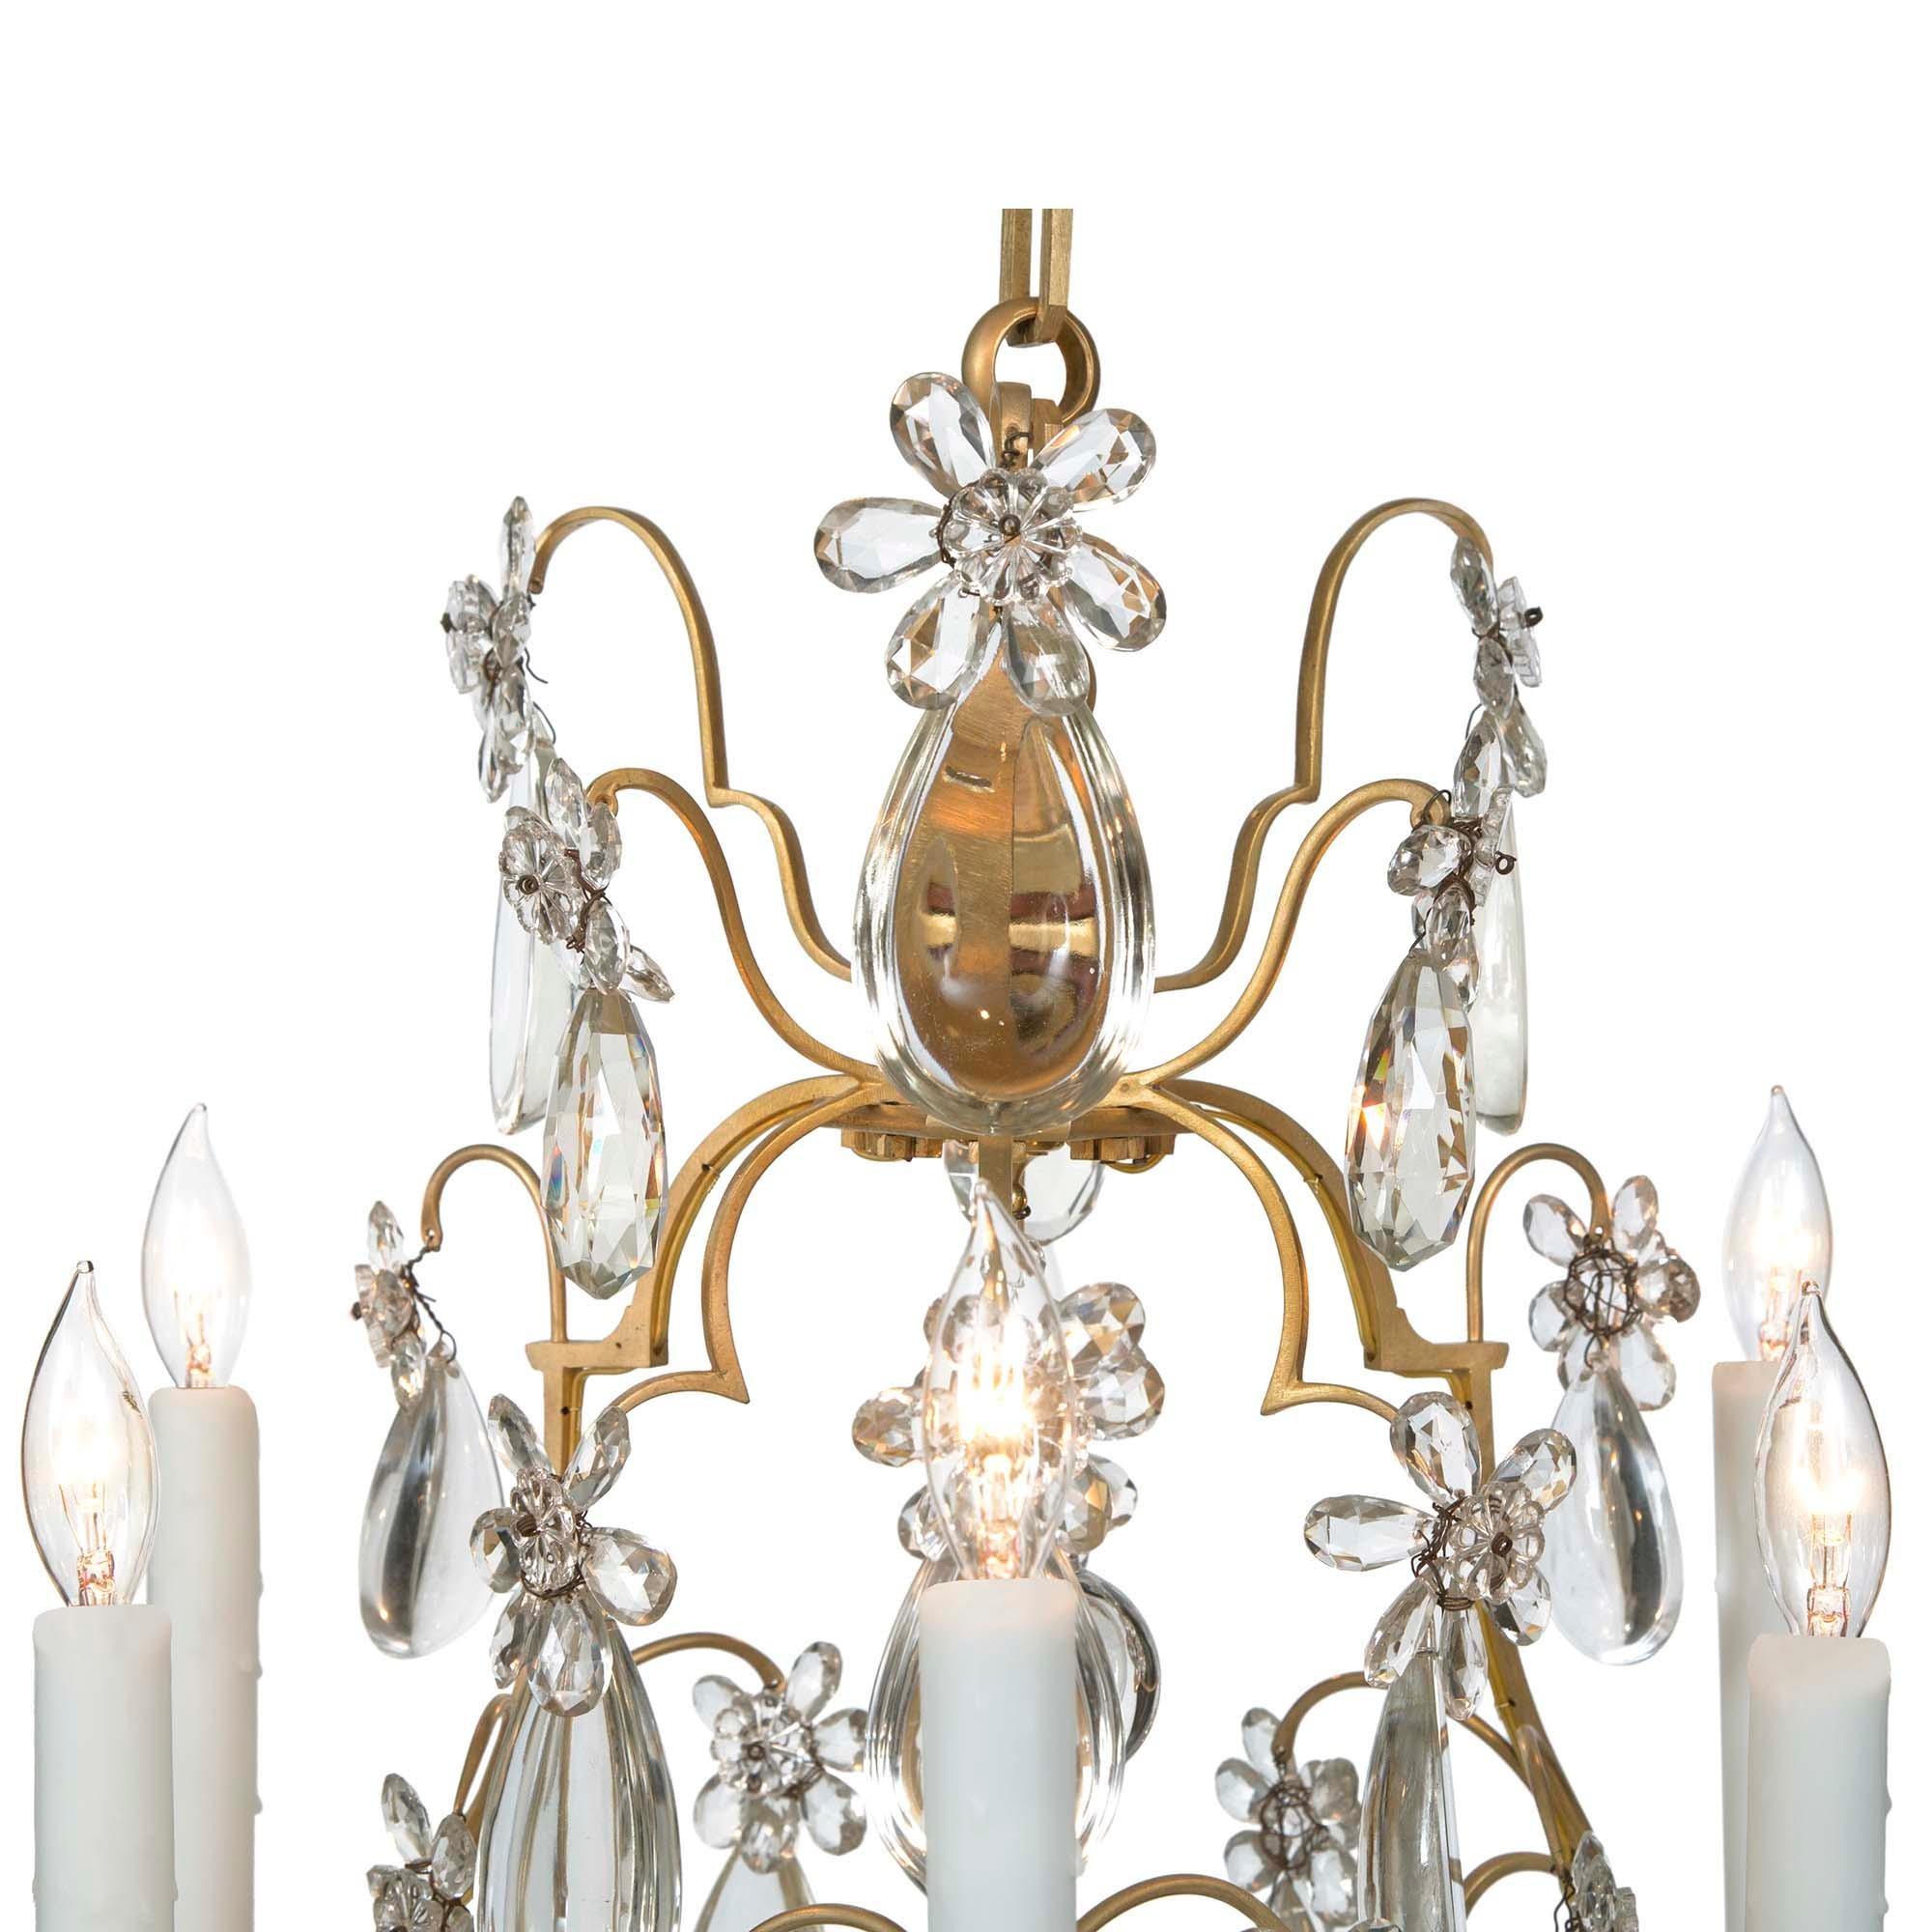 An elegant French 19th Louis XV st. Baccarat crystal and ormolu six light chandelier. The chandelier is centered by a bottom solid crystal ball pendant amidst fine cut and tear drop shaped crystal pendants. each wonderfully scrolled arm is adorned